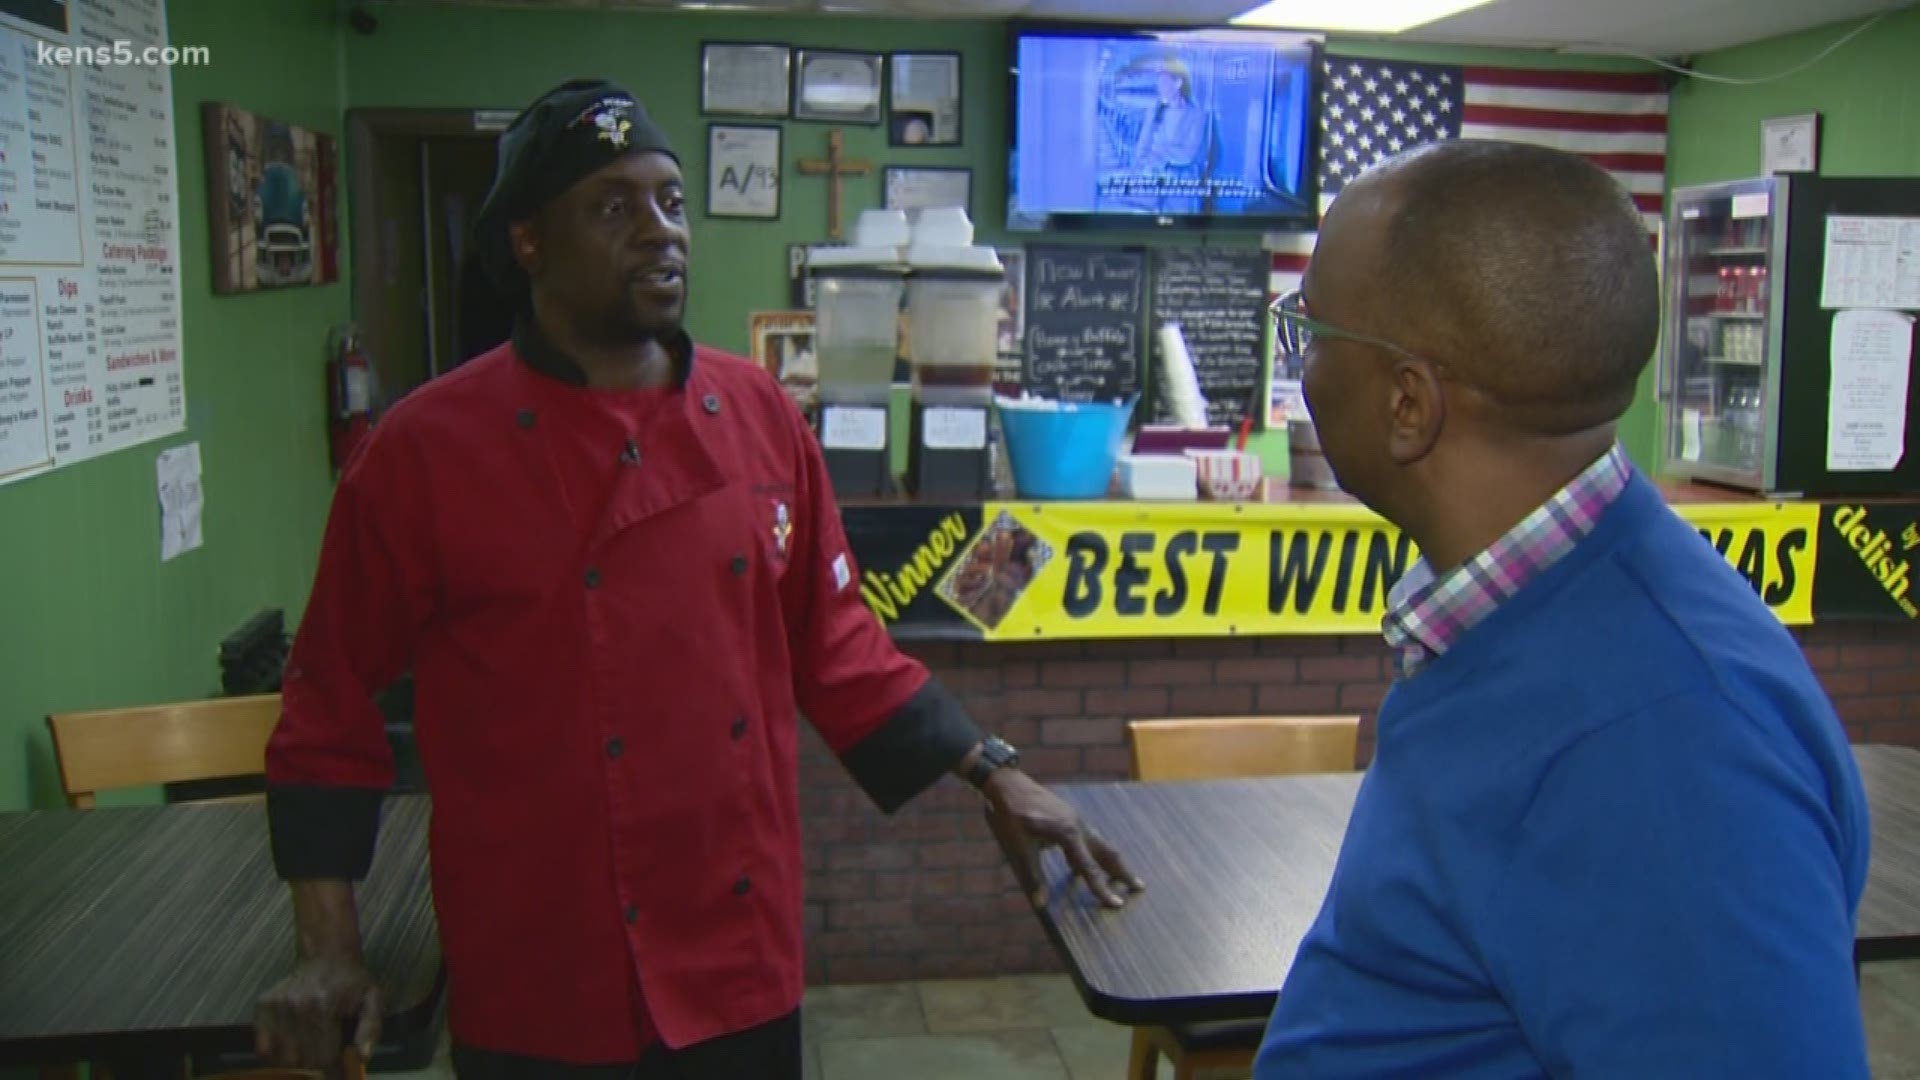 You can't watch the Super Bowl this Sunday without game-time grub, so Neighborhood Eats went to investigate a restaurant voted best wings in Texas.